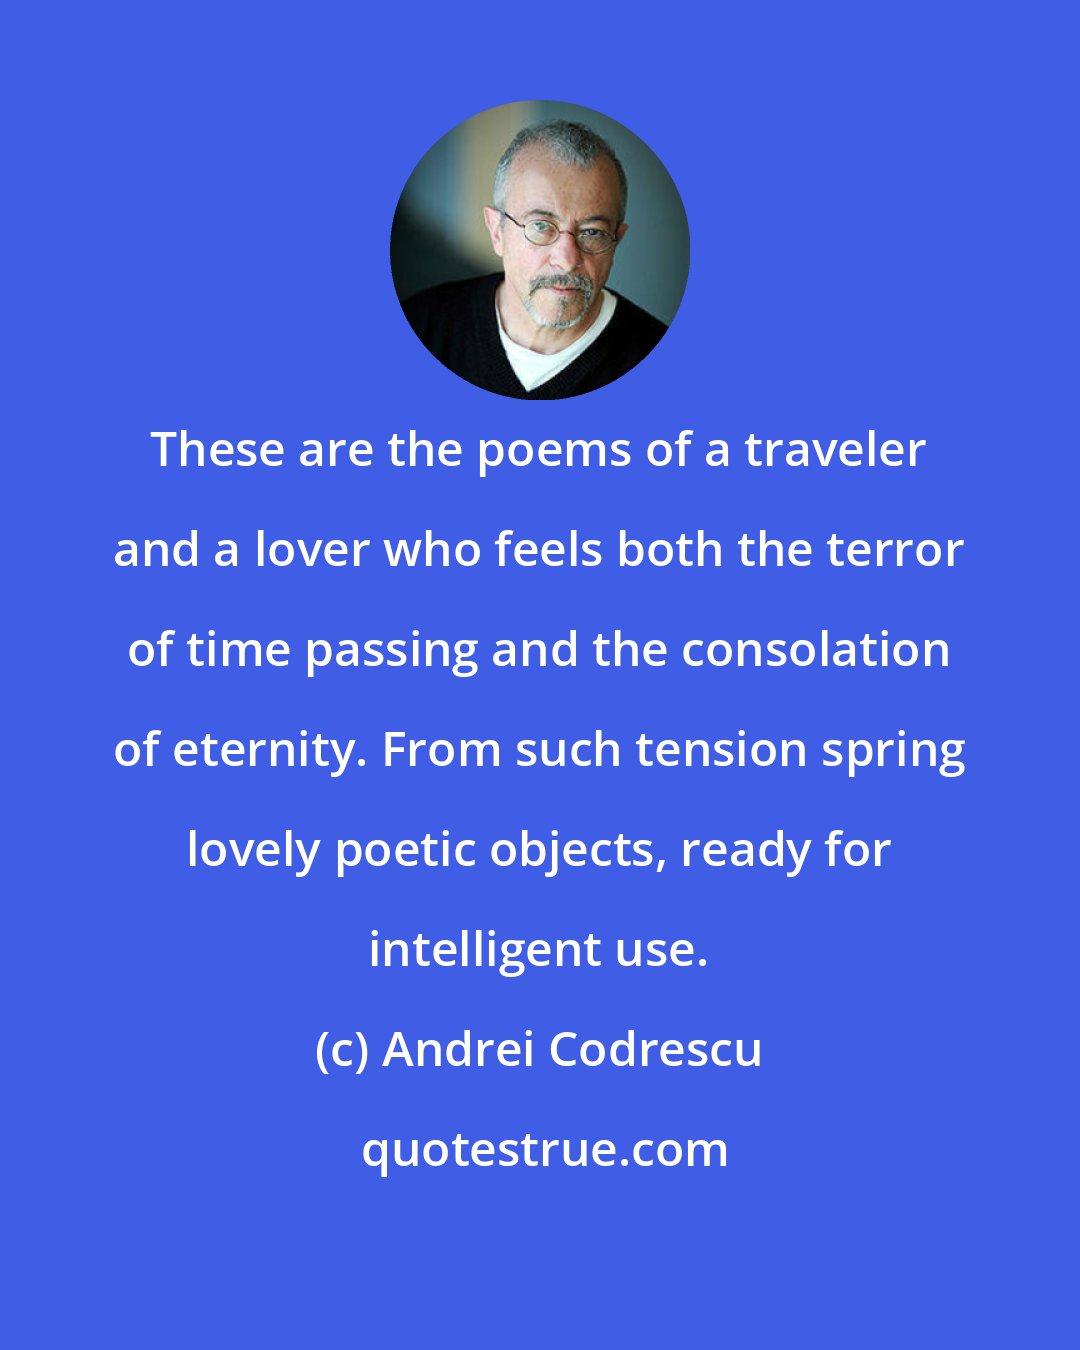 Andrei Codrescu: These are the poems of a traveler and a lover who feels both the terror of time passing and the consolation of eternity. From such tension spring lovely poetic objects, ready for intelligent use.